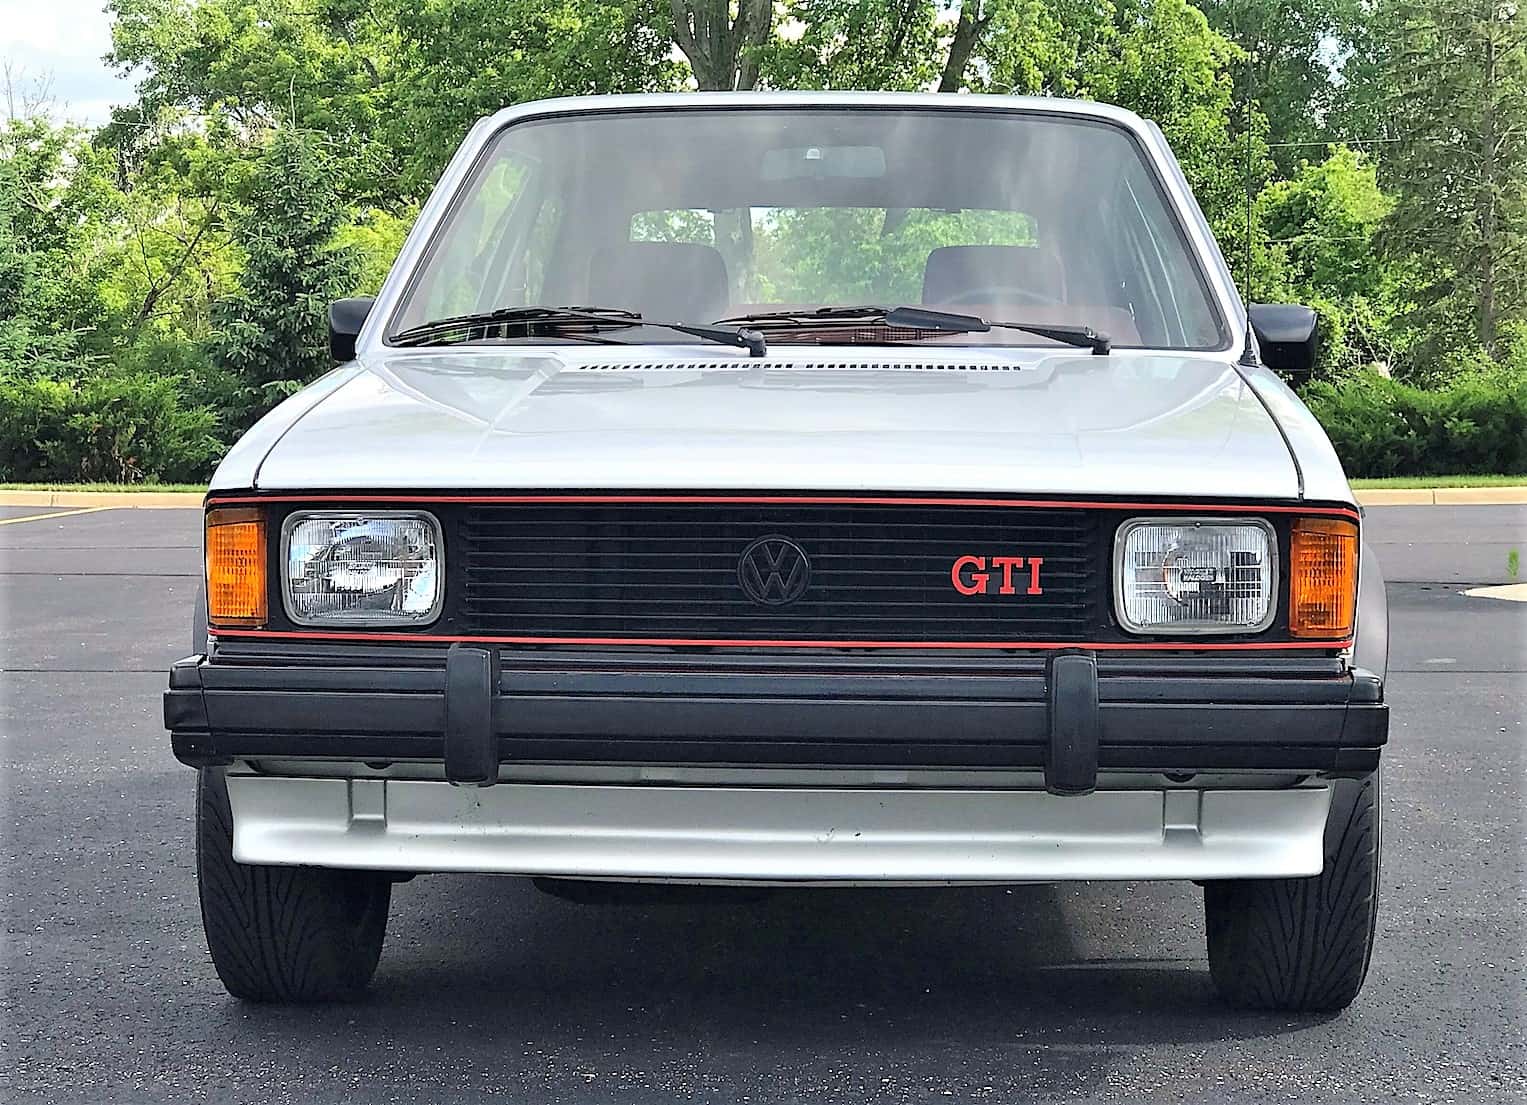 gti, Time Machine Test Drive: 1984 VW Rabbit GTI sowed seeds of  hot hatch, ClassicCars.com Journal